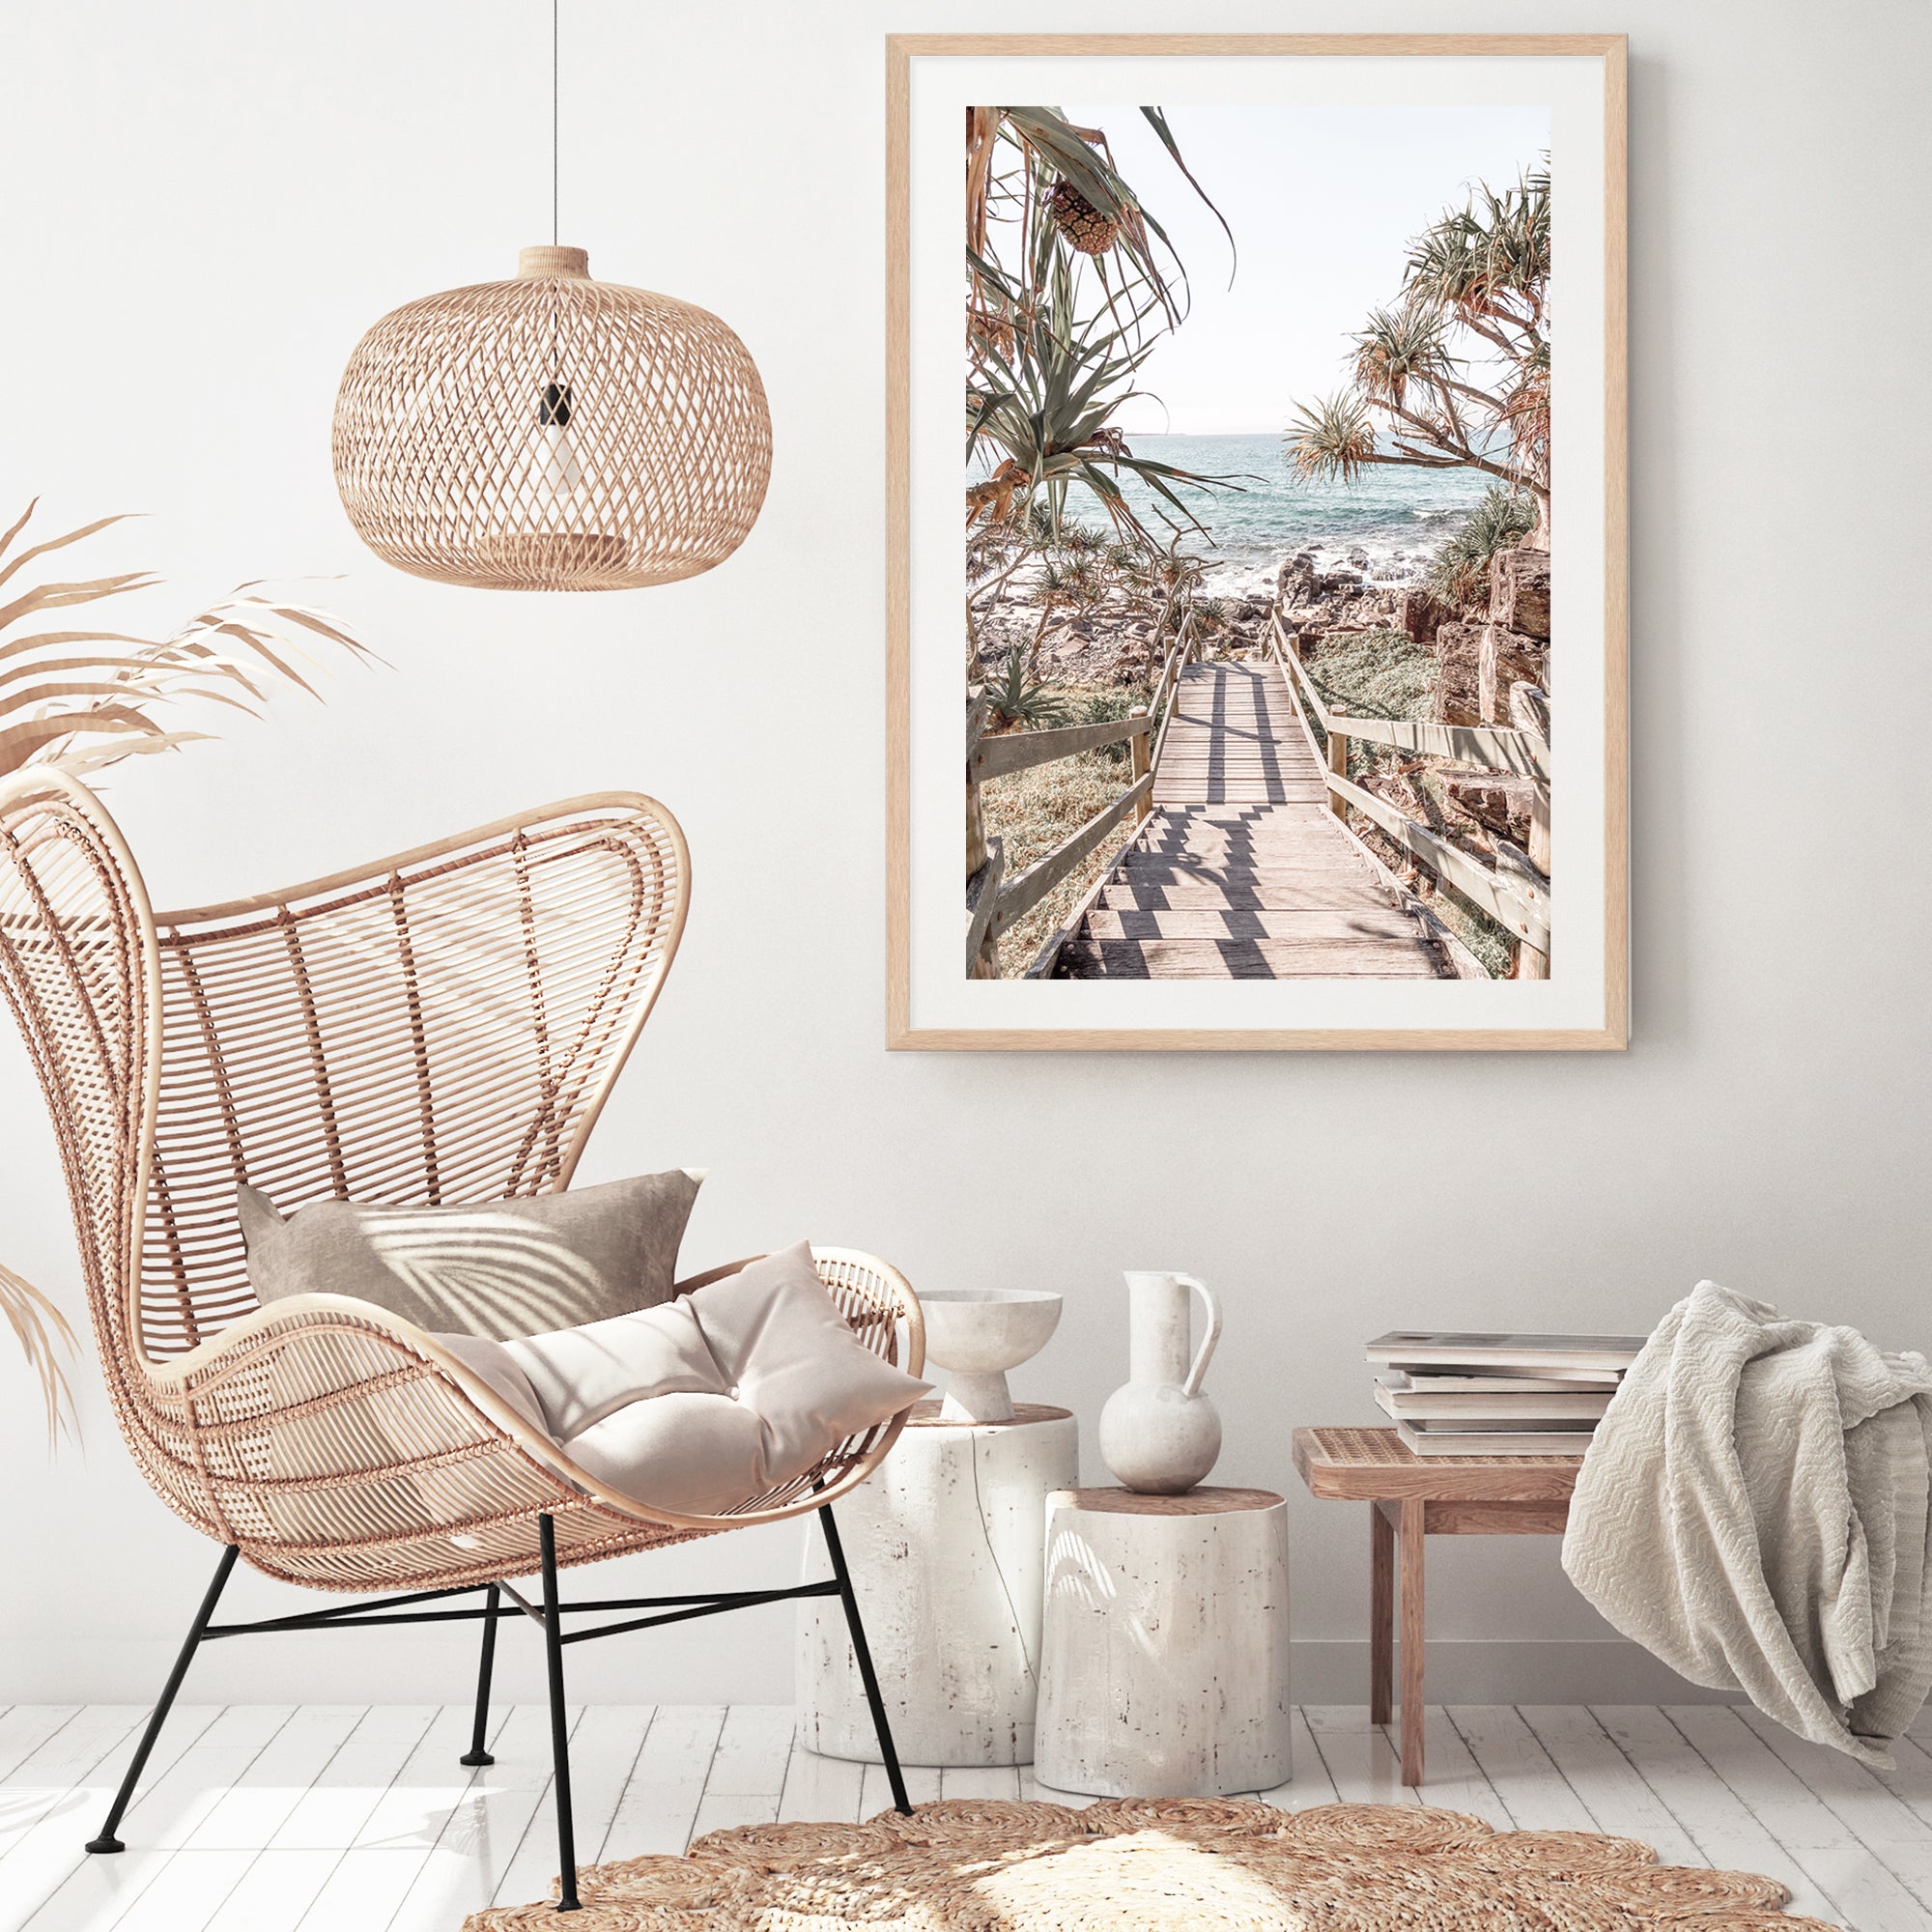 Stetched canvas print of stairs to the beach artwork, available framed or unframed.